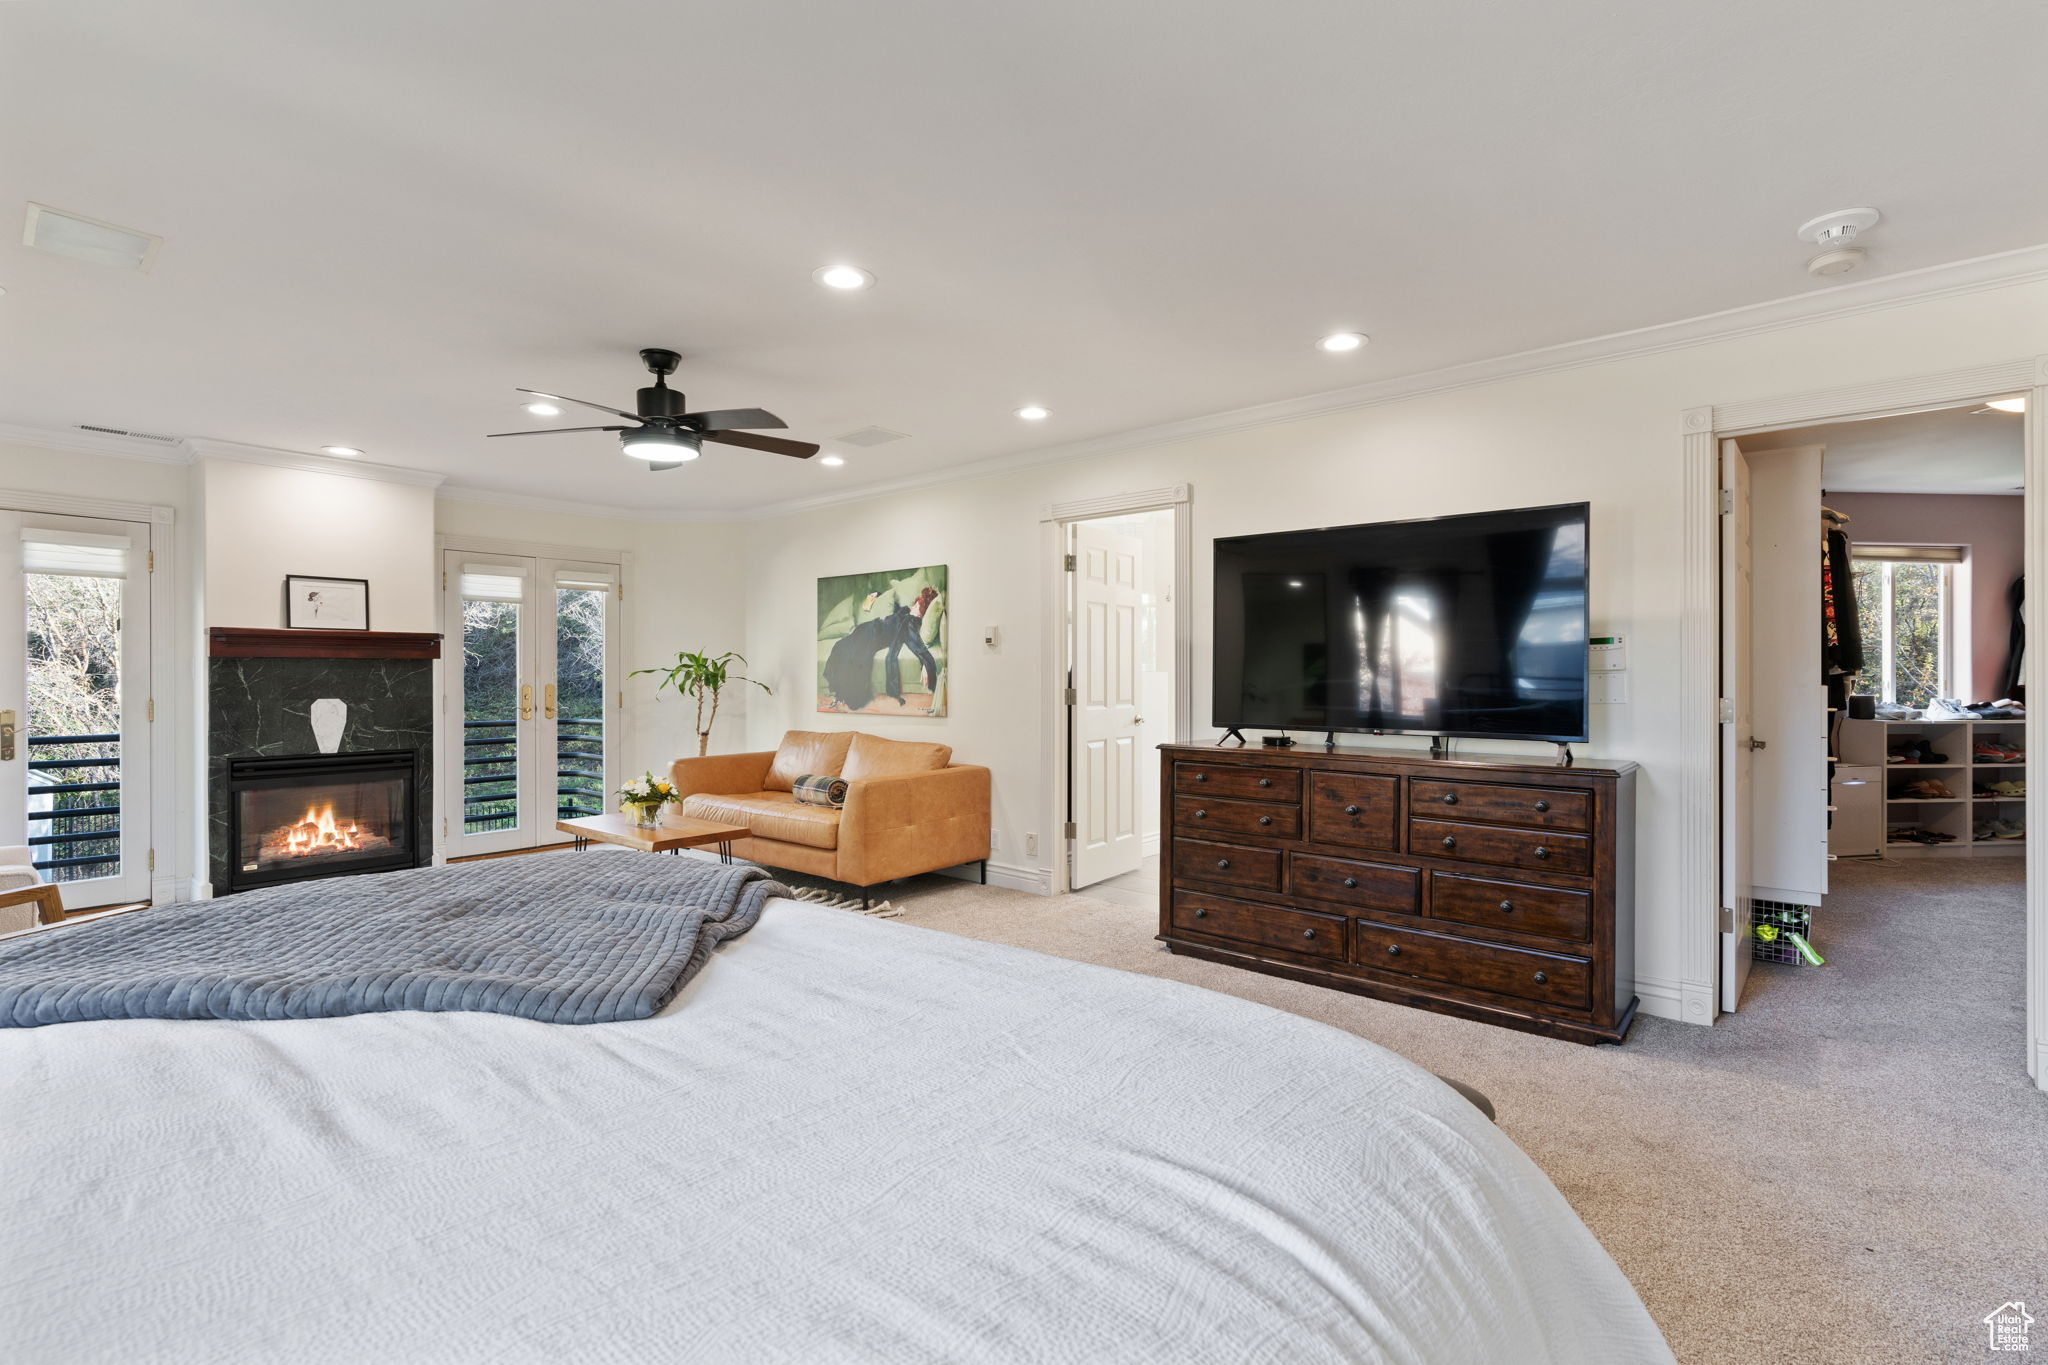 Bedroom featuring ornamental molding, light carpet, ceiling fan, and access to exterior